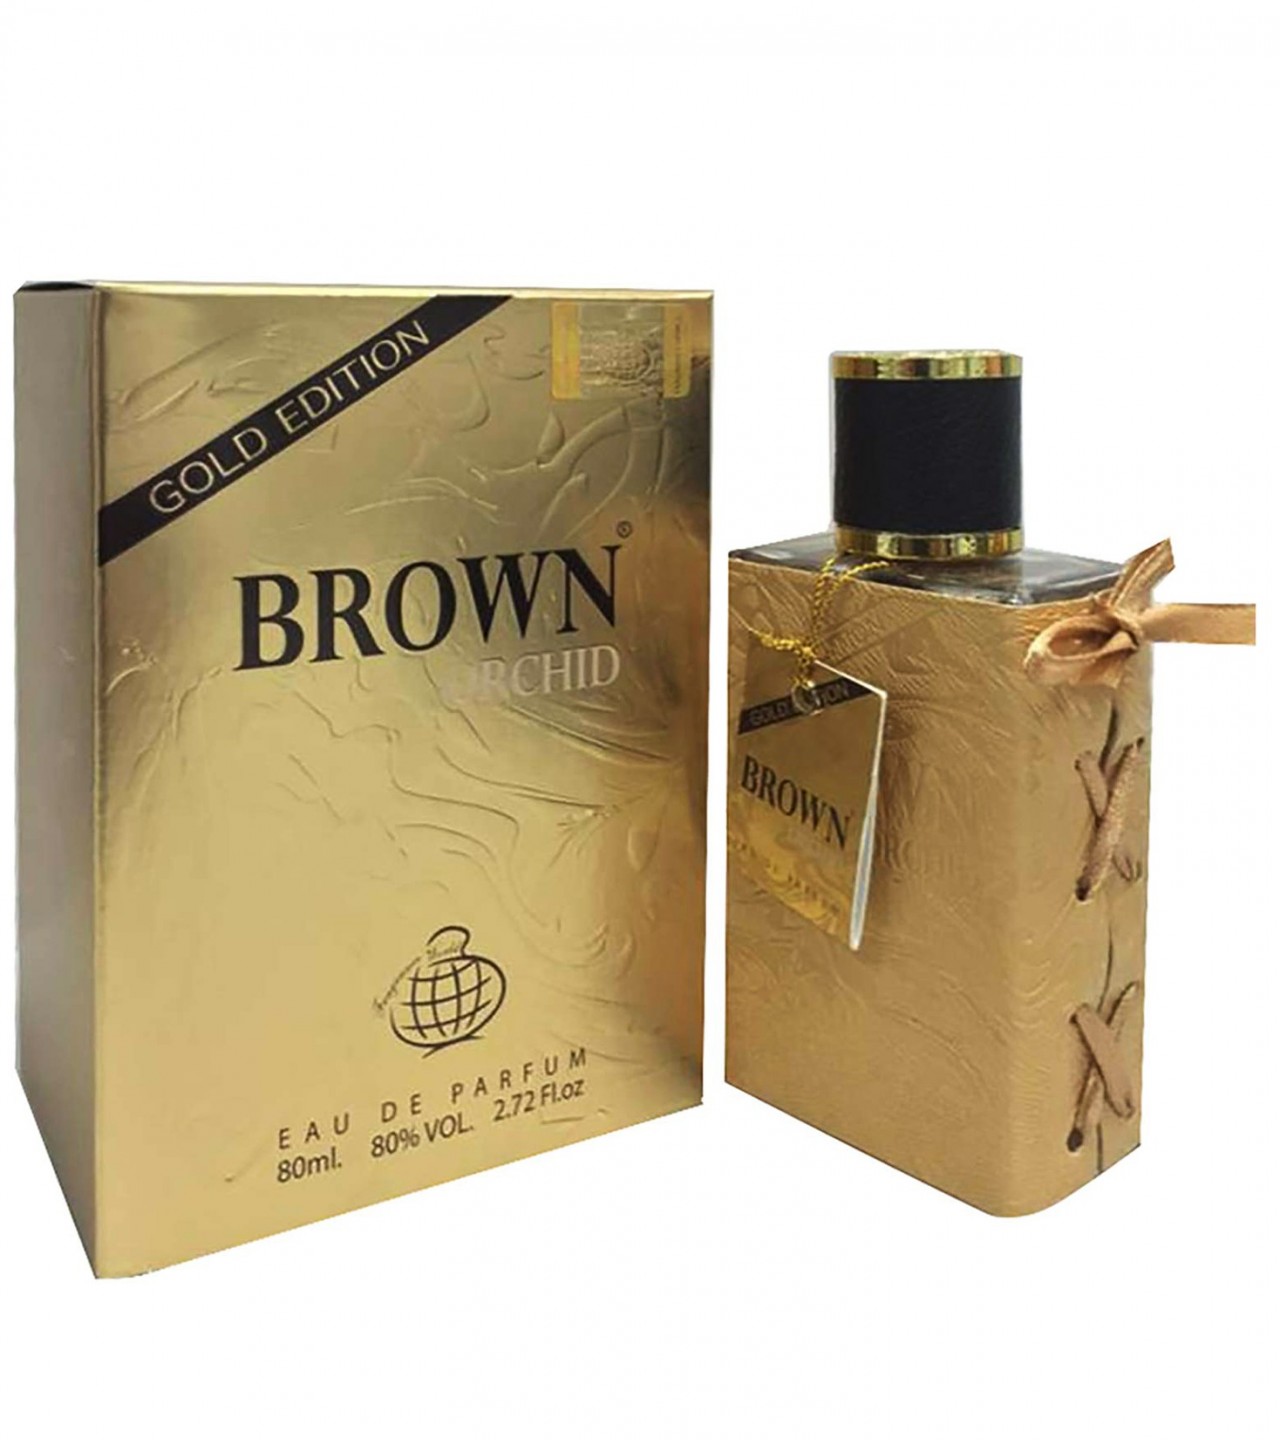 Brown Orchid Gold Edition Perfume For Men – EDP – 80 ml